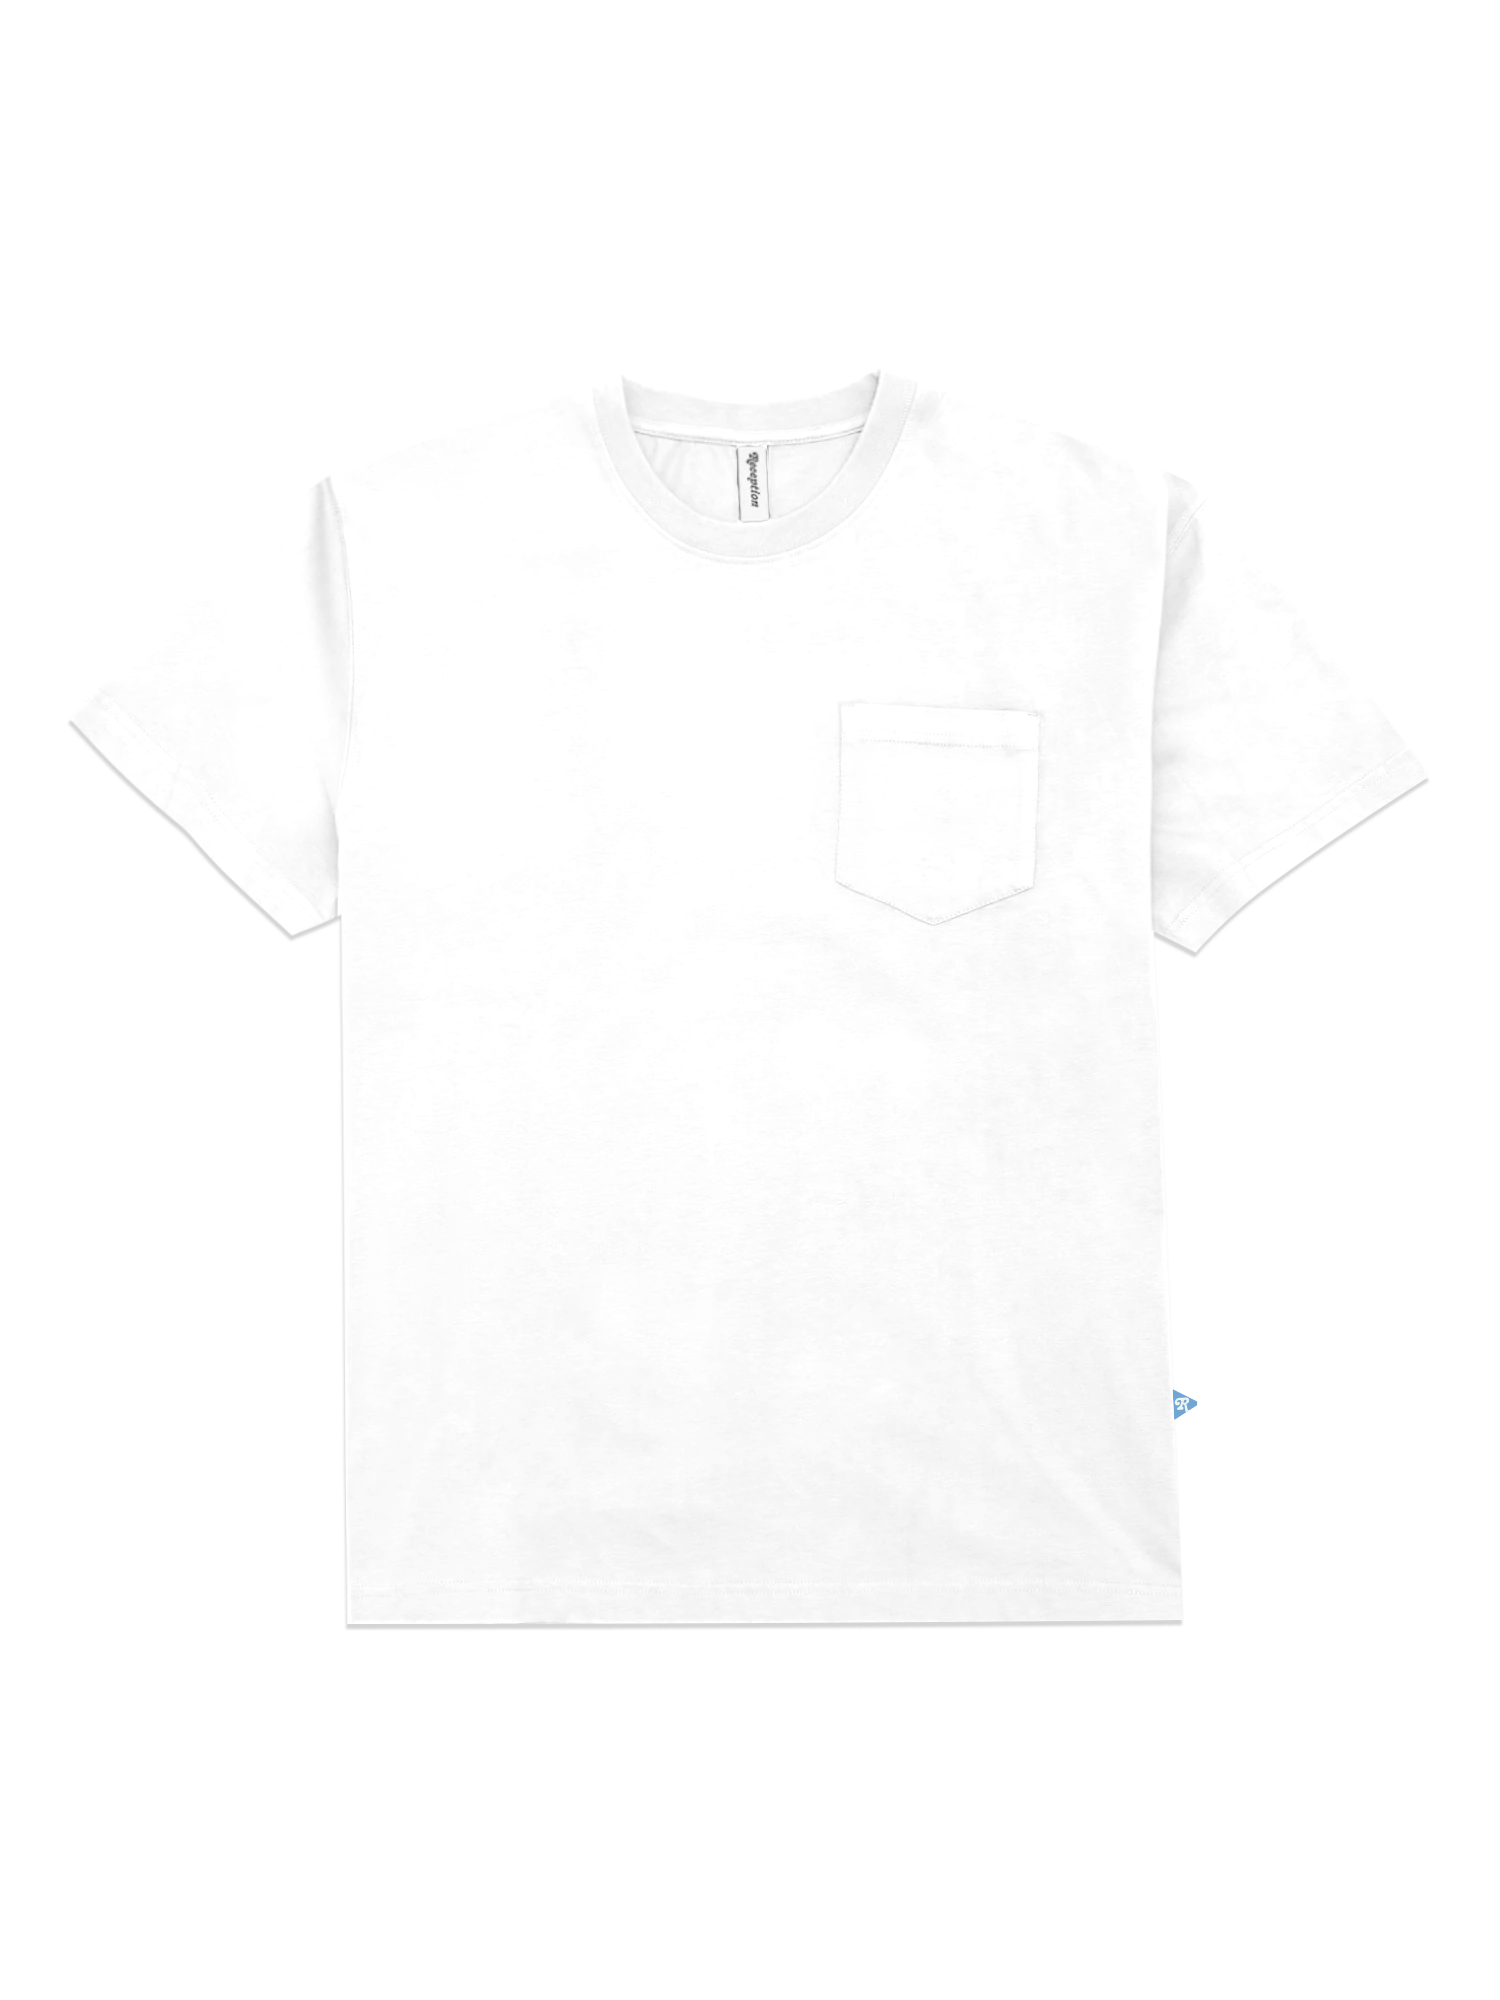 Reception - Tee - Dining - SS Pocket Tee - White